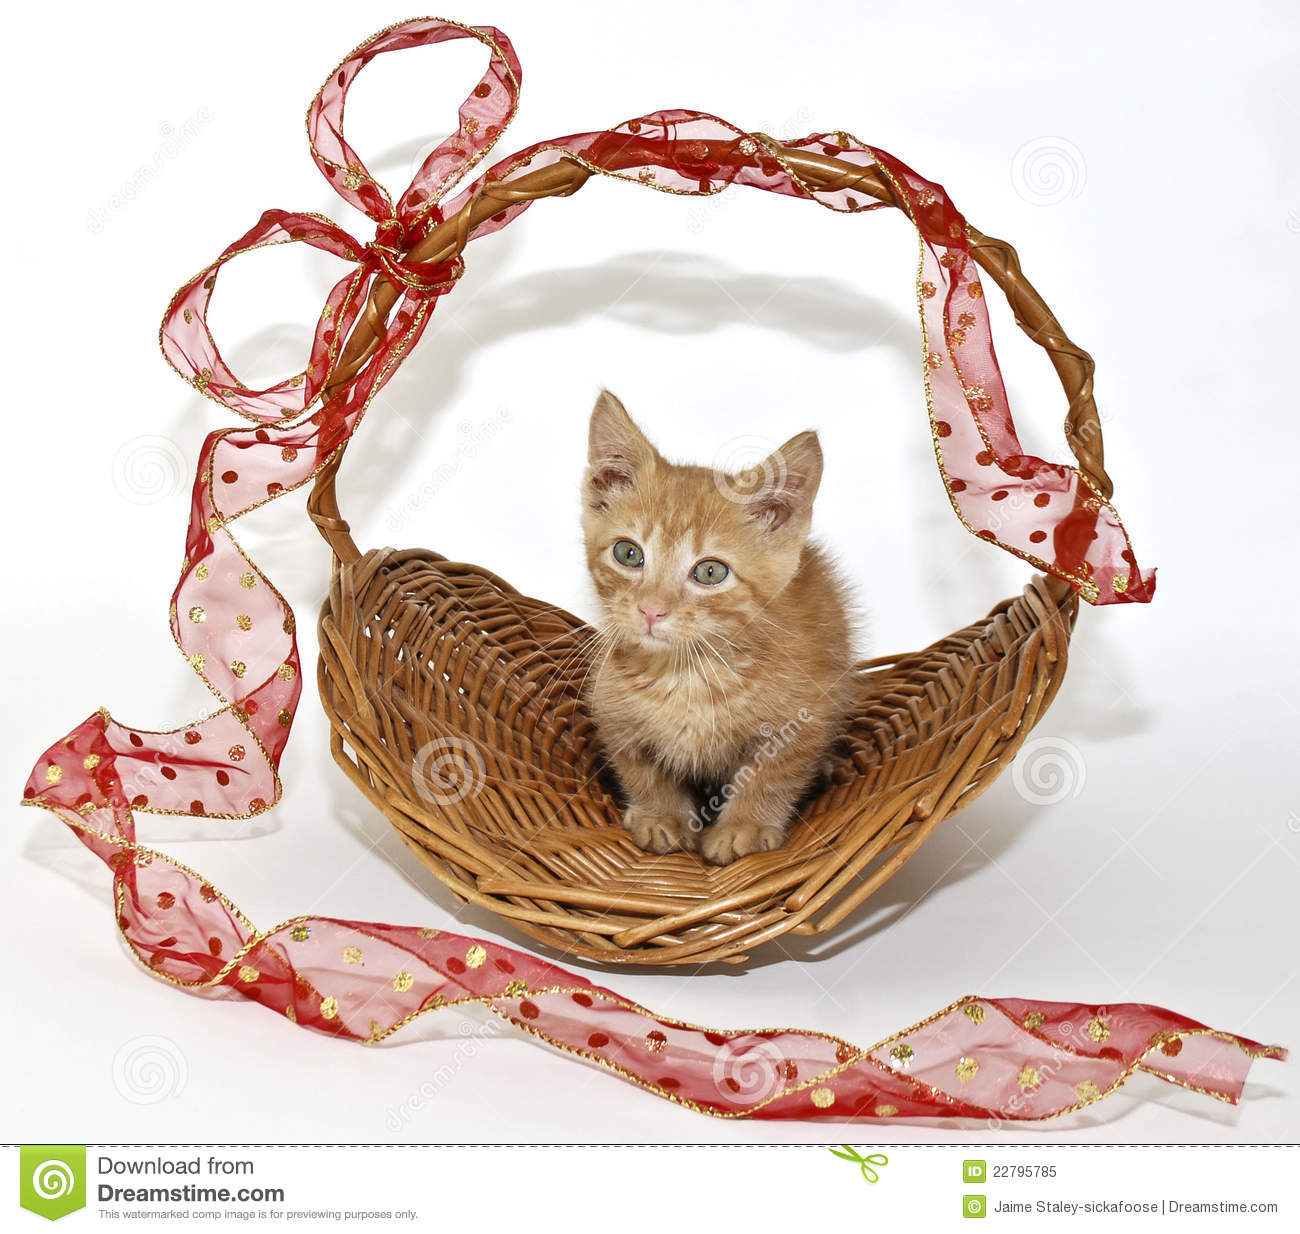 Little Yellow Munchkin Kitten Sitting In A Basket With A Red Bow On A    